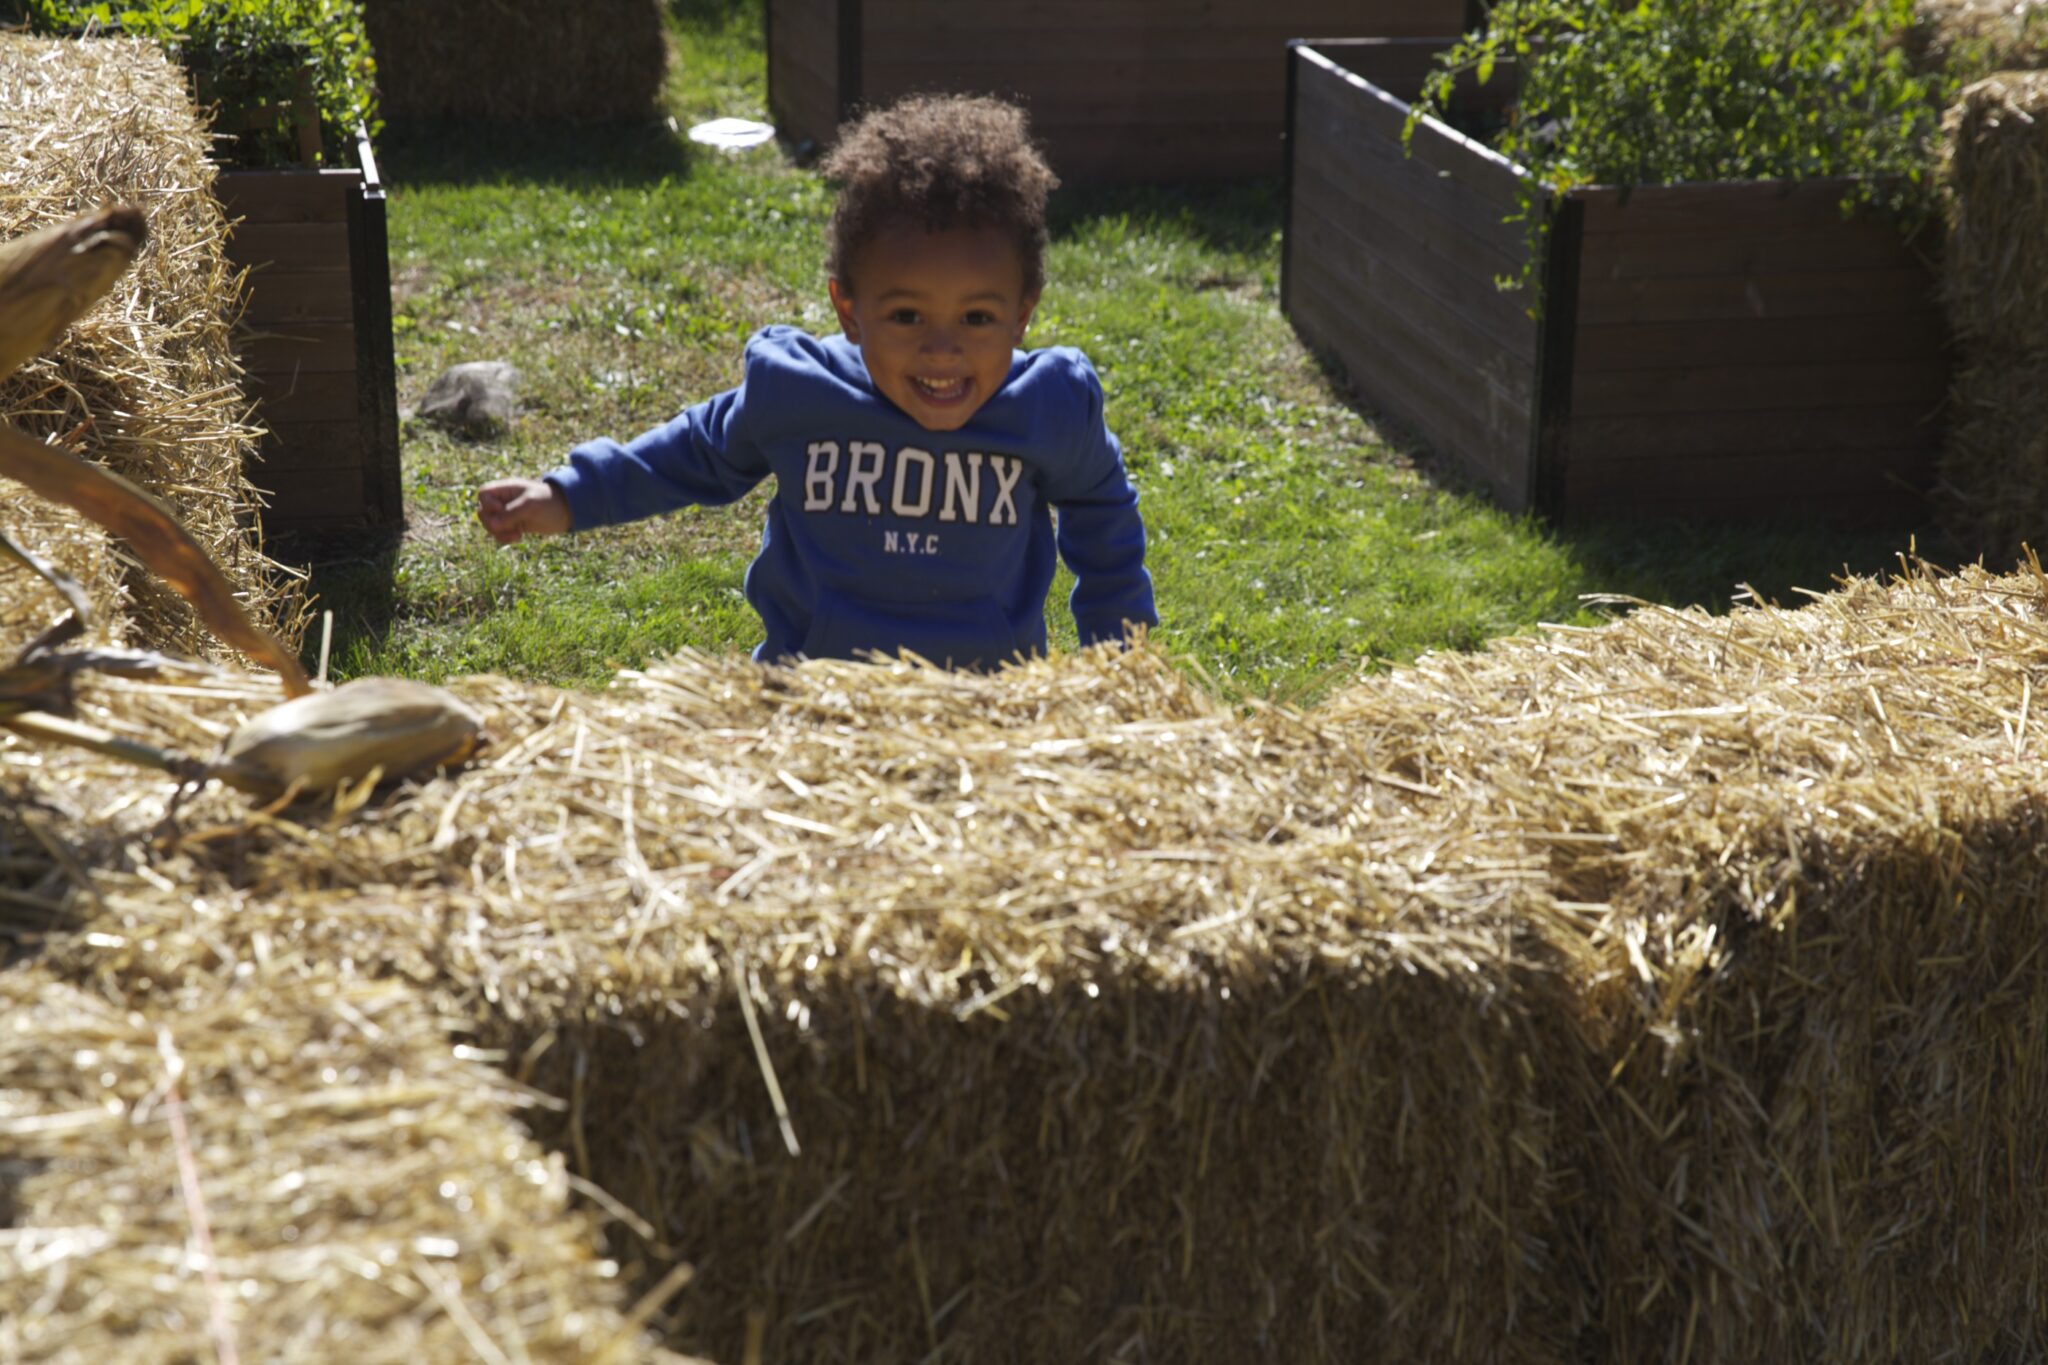 Fall Festival Image: child smiling behind bale of hay